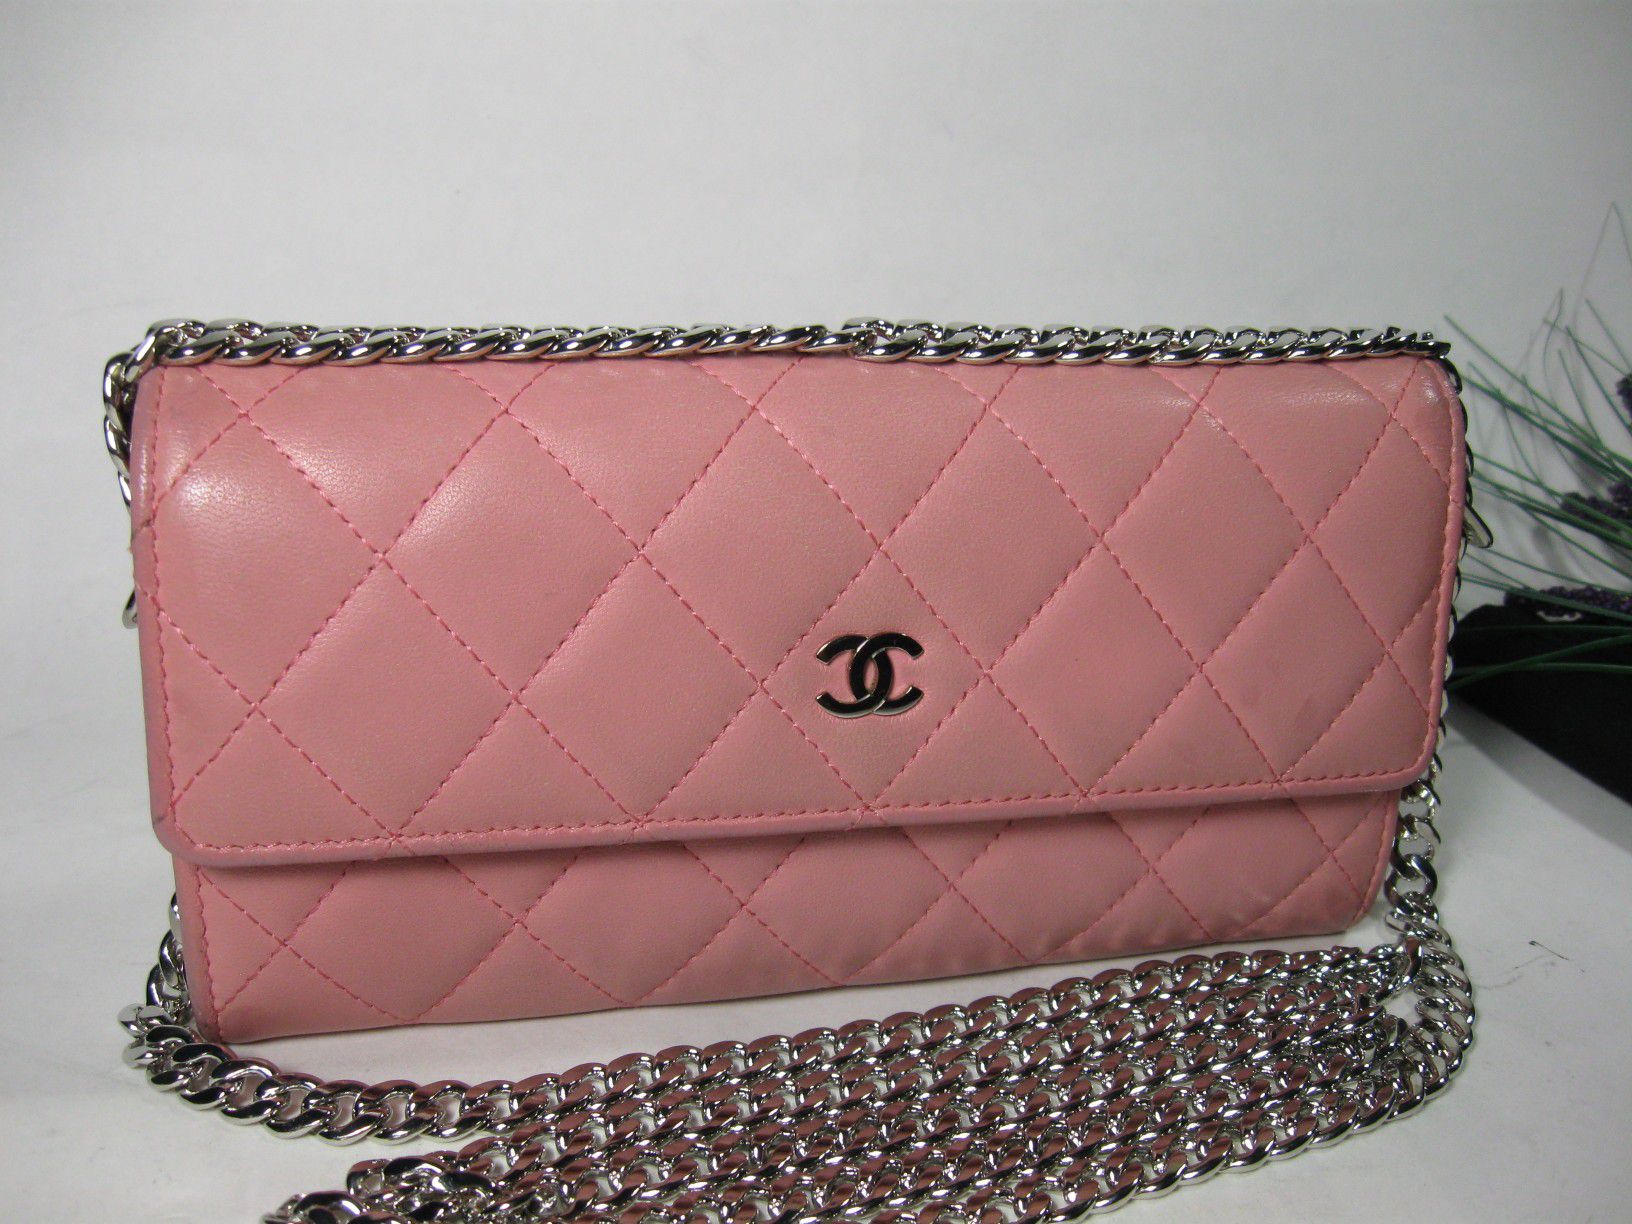 Chanel Pink Lambskin Leather CC Long Bag Wallet